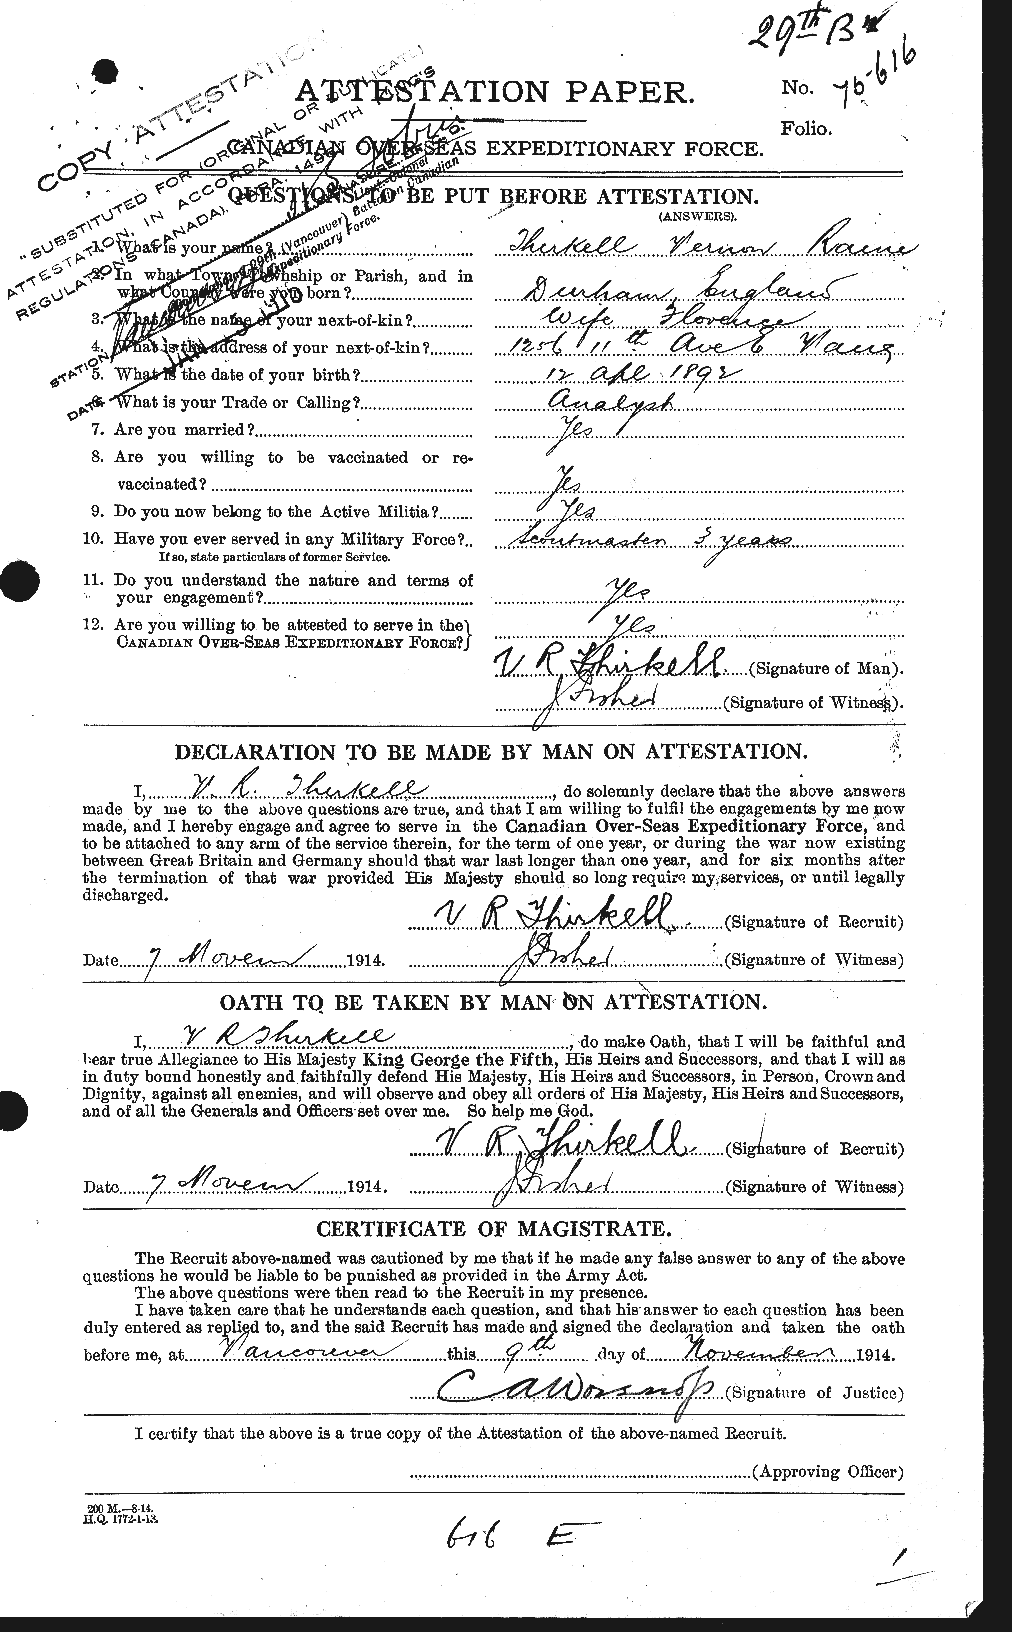 Personnel Records of the First World War - CEF 632056a